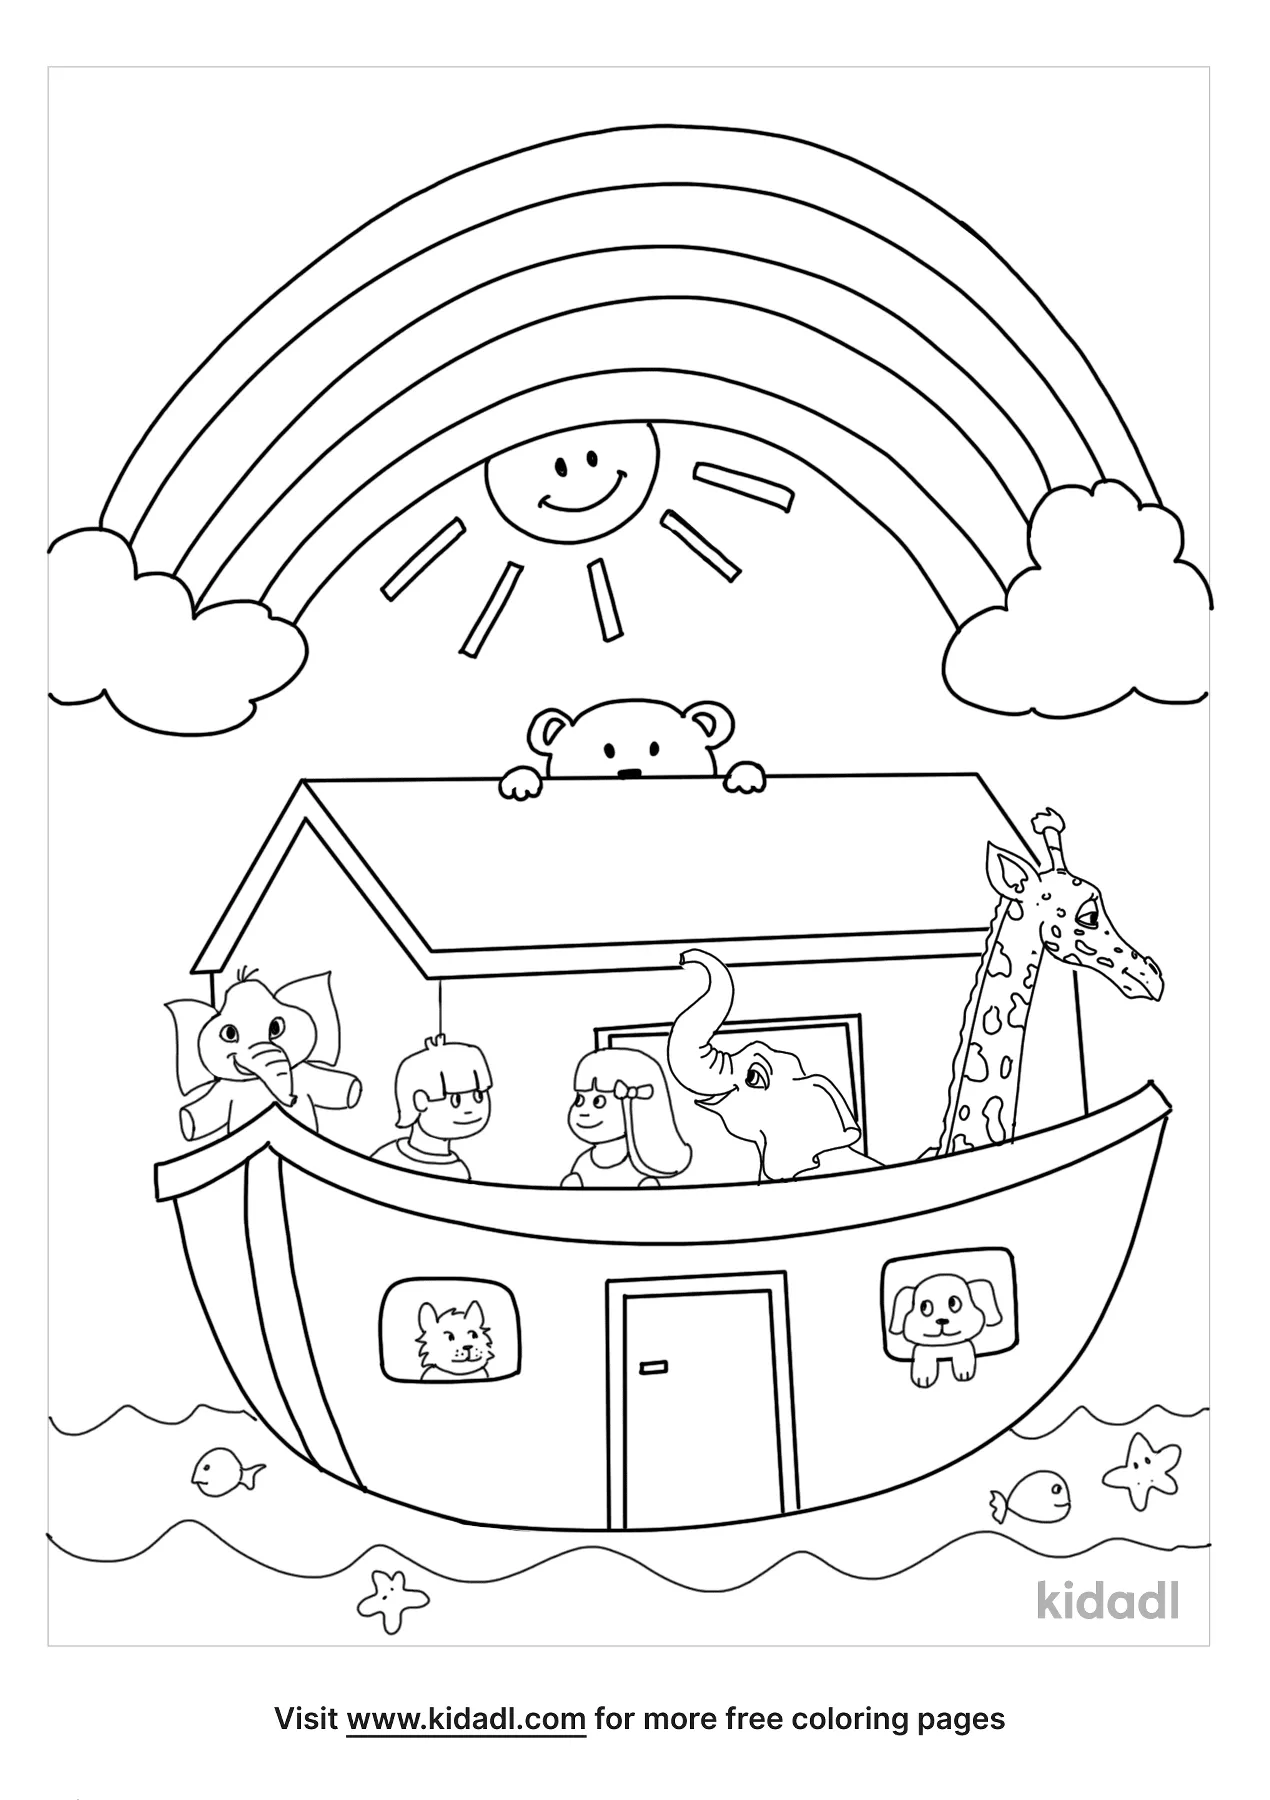 Noah's Ark Coloring Pages   Free Bible Coloring Pages   Kidadl